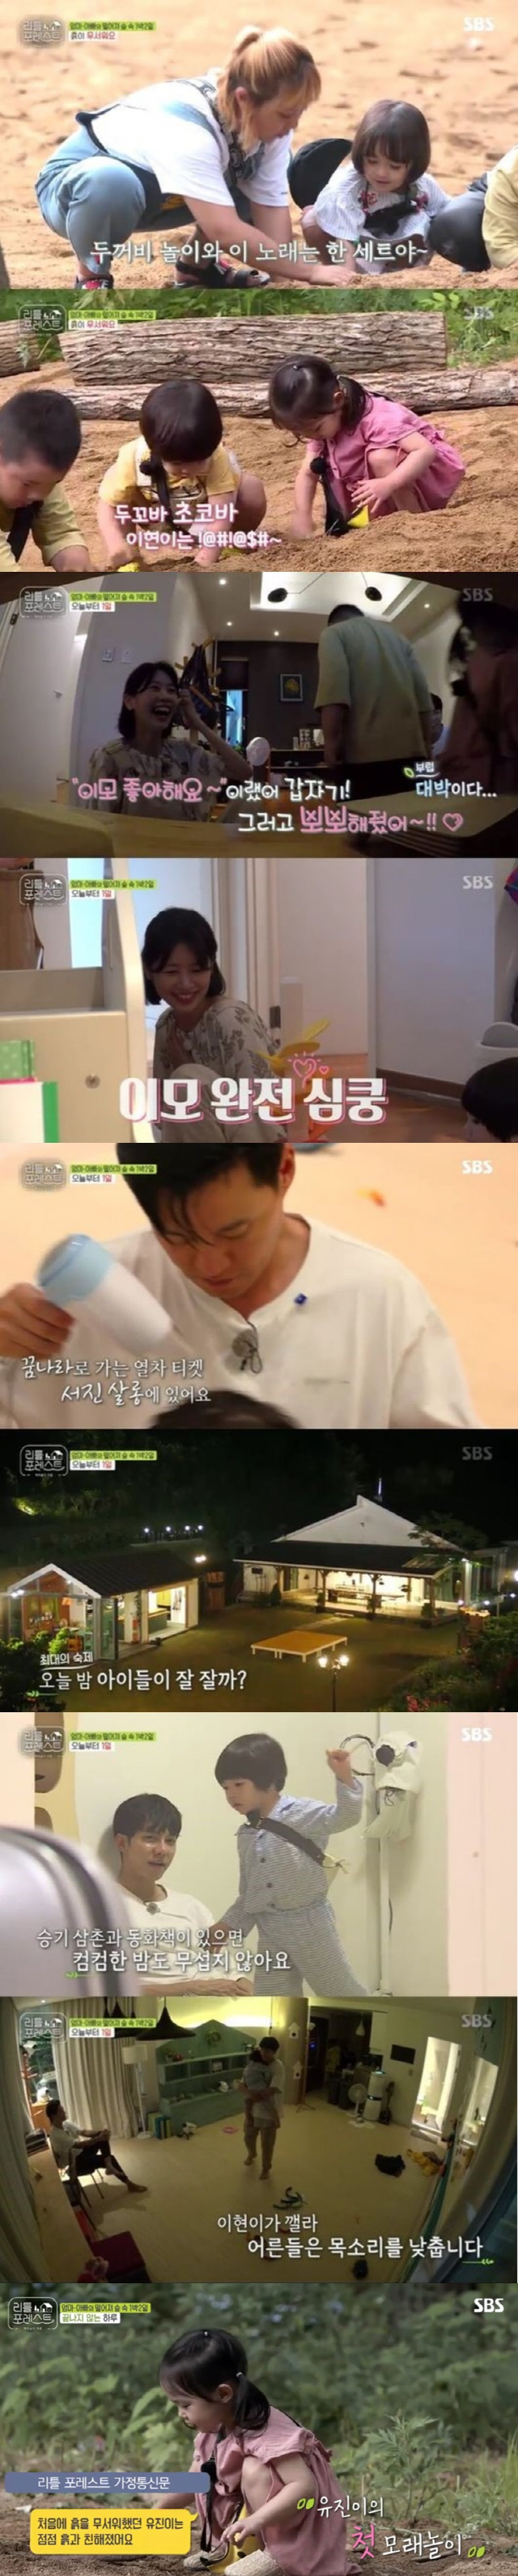 SBSs Wall Street Arts Little Forest, which aired on the 19th, jumped to the highest audience rating of 7% per minute (based on Nielsen Korea metropolitan area furniture), and received a clear eye stamp for viewers.Littles then went on to plant blueberries, among which Lee Han showed interest in shoveling, and Lee Seung-gi led the atmosphere by direct shoveling.Grace, who also sampled blueberries herself, expressed her childs unique concentricity with the childs story, saying, Lets give as much water as we eat, Lee Seung-gi said.Park Na-rae also began to understand the minds of Little, saying, Lets go because I am ashamed of tree blood.In addition, there was a strange intimacy between the members and the Littles in the Tjakbangol. Jung So-min received the Confessions from Little Eatle.Eugene even kissed Jung So-min, saying, I like my aunt, and Jung So-min was happy that he was complete heartache.Lee Han embraced Lee Seung-gi, who was cute jealous of Eugene, and expressed his intimacy, and he expressed interest in Brooke.Park Na-rae persuaded Lee Han-yi, who was not going to eat, that Brook would like it, and Lee Han-yi showed off the storm food when Brooke came.Lee Seo-jin smiled relieved and pleased when the hamburger steak prepared for the Littles was responding well.Meanwhile, Lee Seung-gi found Lee Han-is shaking teeth.Lee Han had trauma at his feet, but Lee Seung-gi and Park Na-rae, who confirmed the condition, persuaded Lee that if you can not eat meat tomorrow, you can not eat meat tomorrow.Lee Han, who was in trouble, said, I will shake it out. However, Lee Seung-gi, who was anxious, challenged his feet, but Lee Han immediately shouted and failed.Since then, the night of the night has come and the members have divided their roles and started to prepare for bed.Lee Seo-jin, a soaked child, dried the wet childrens heads, smoked mosquitoes all over the place, and Lee Seung-gi transformed into a all-round carer by reading fairy tale books for children who were not sleepy.Littles went to the dream country with their eyes closed little by little in the members efforts.Finally, the members gathered in the workshop and sent a family letter to each parent.Littles photos showed the childrens day, and parents thanked the members for their pride, which had soared to 7 percent per minute, taking the best minute.